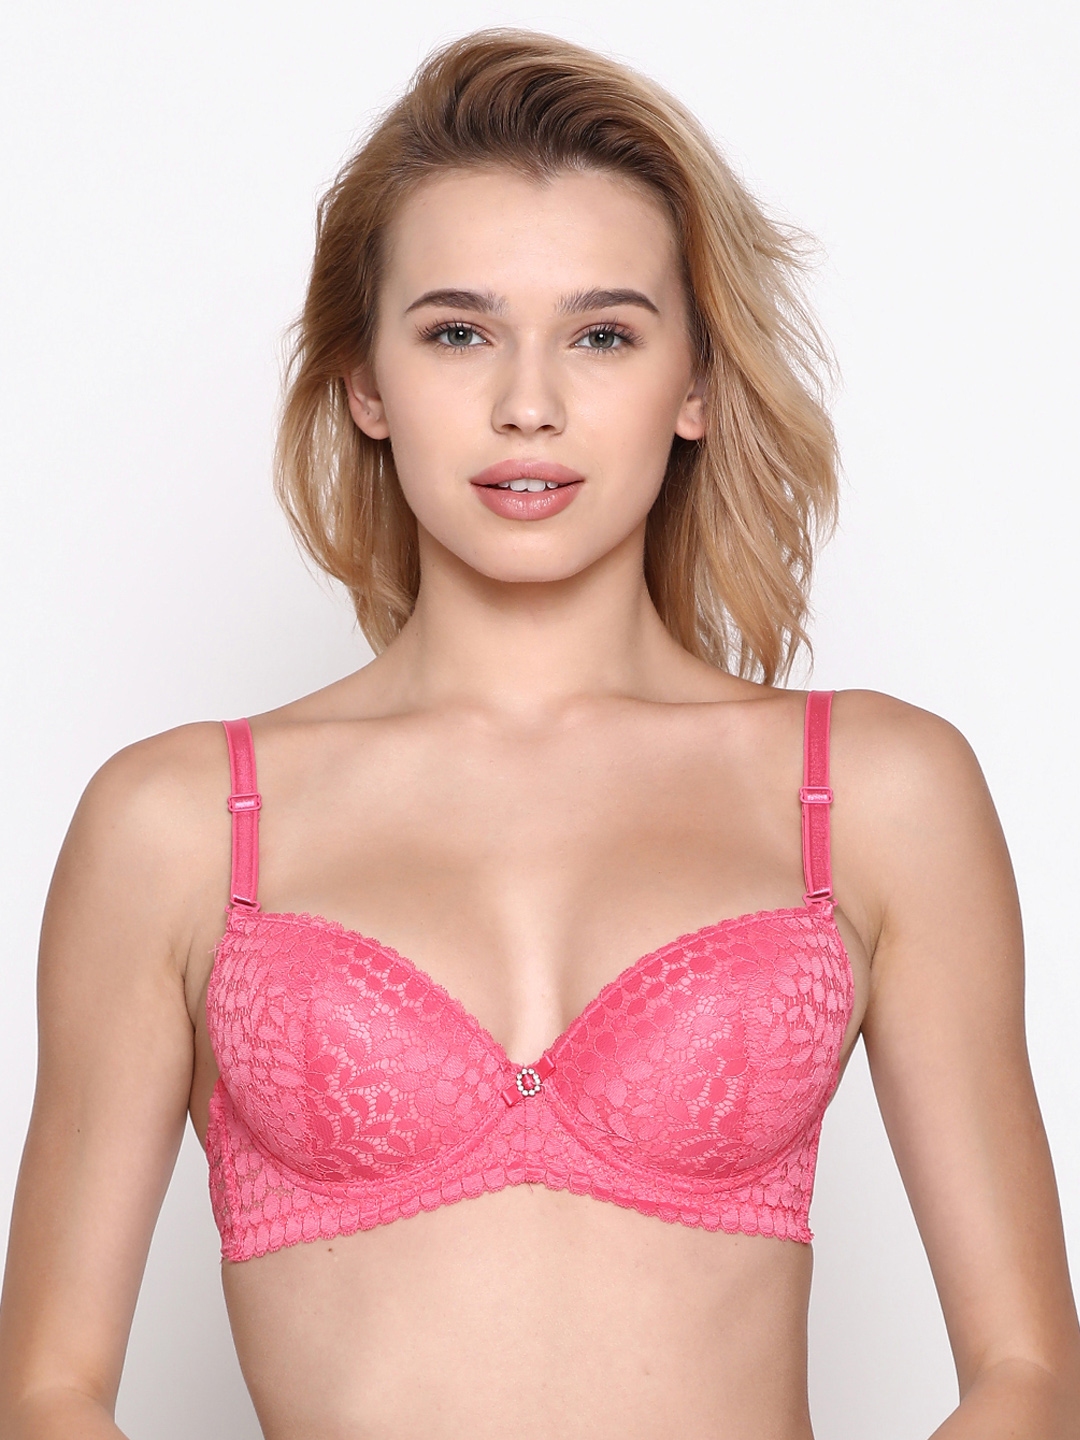 shyaway Pink Lace Underwired Lightly Padded Push-Up Bra S037